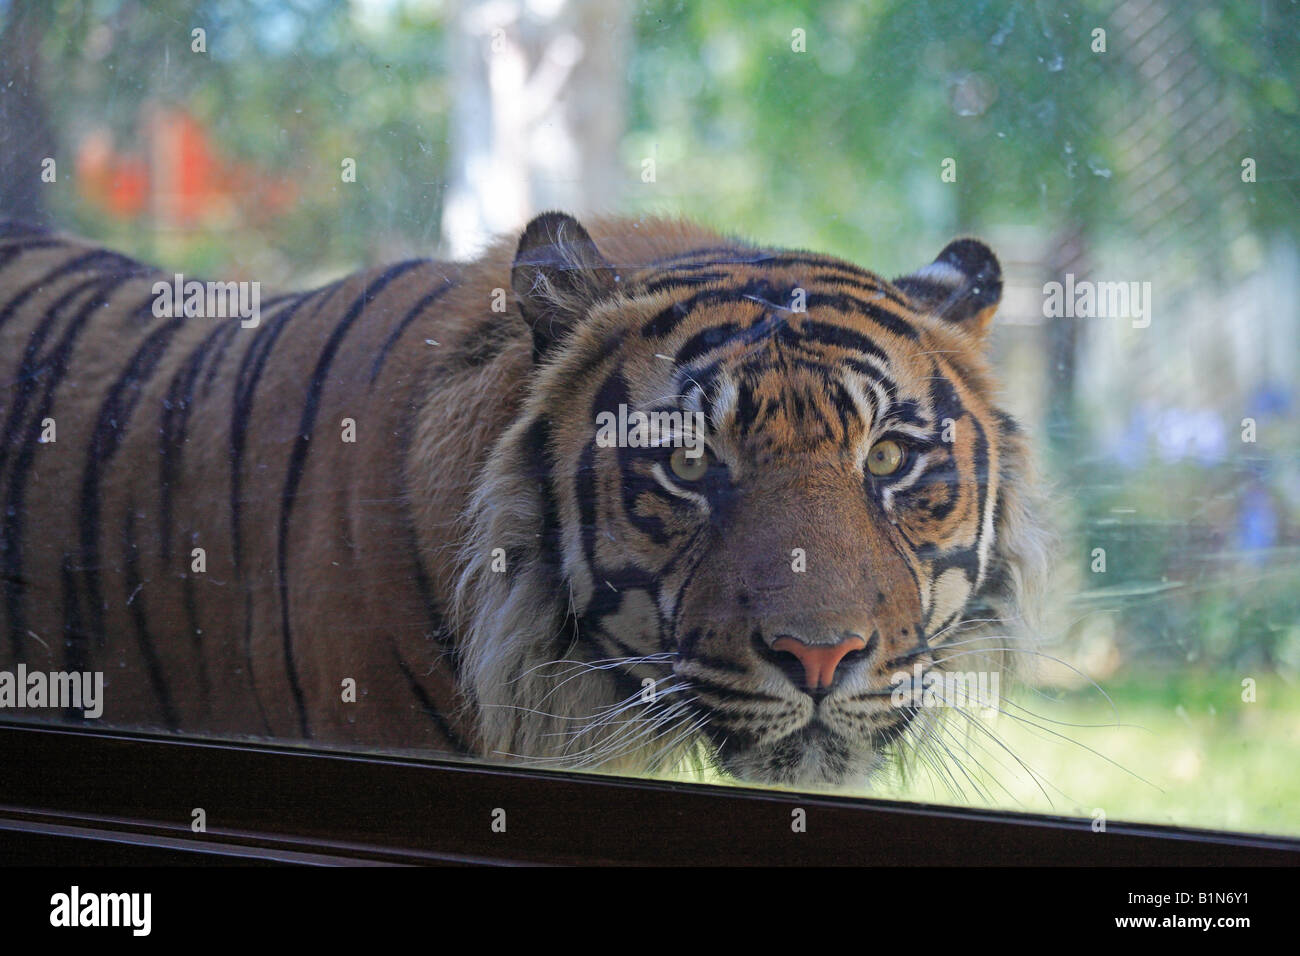 A captive tiger in a zoo behind glass Stock Photo